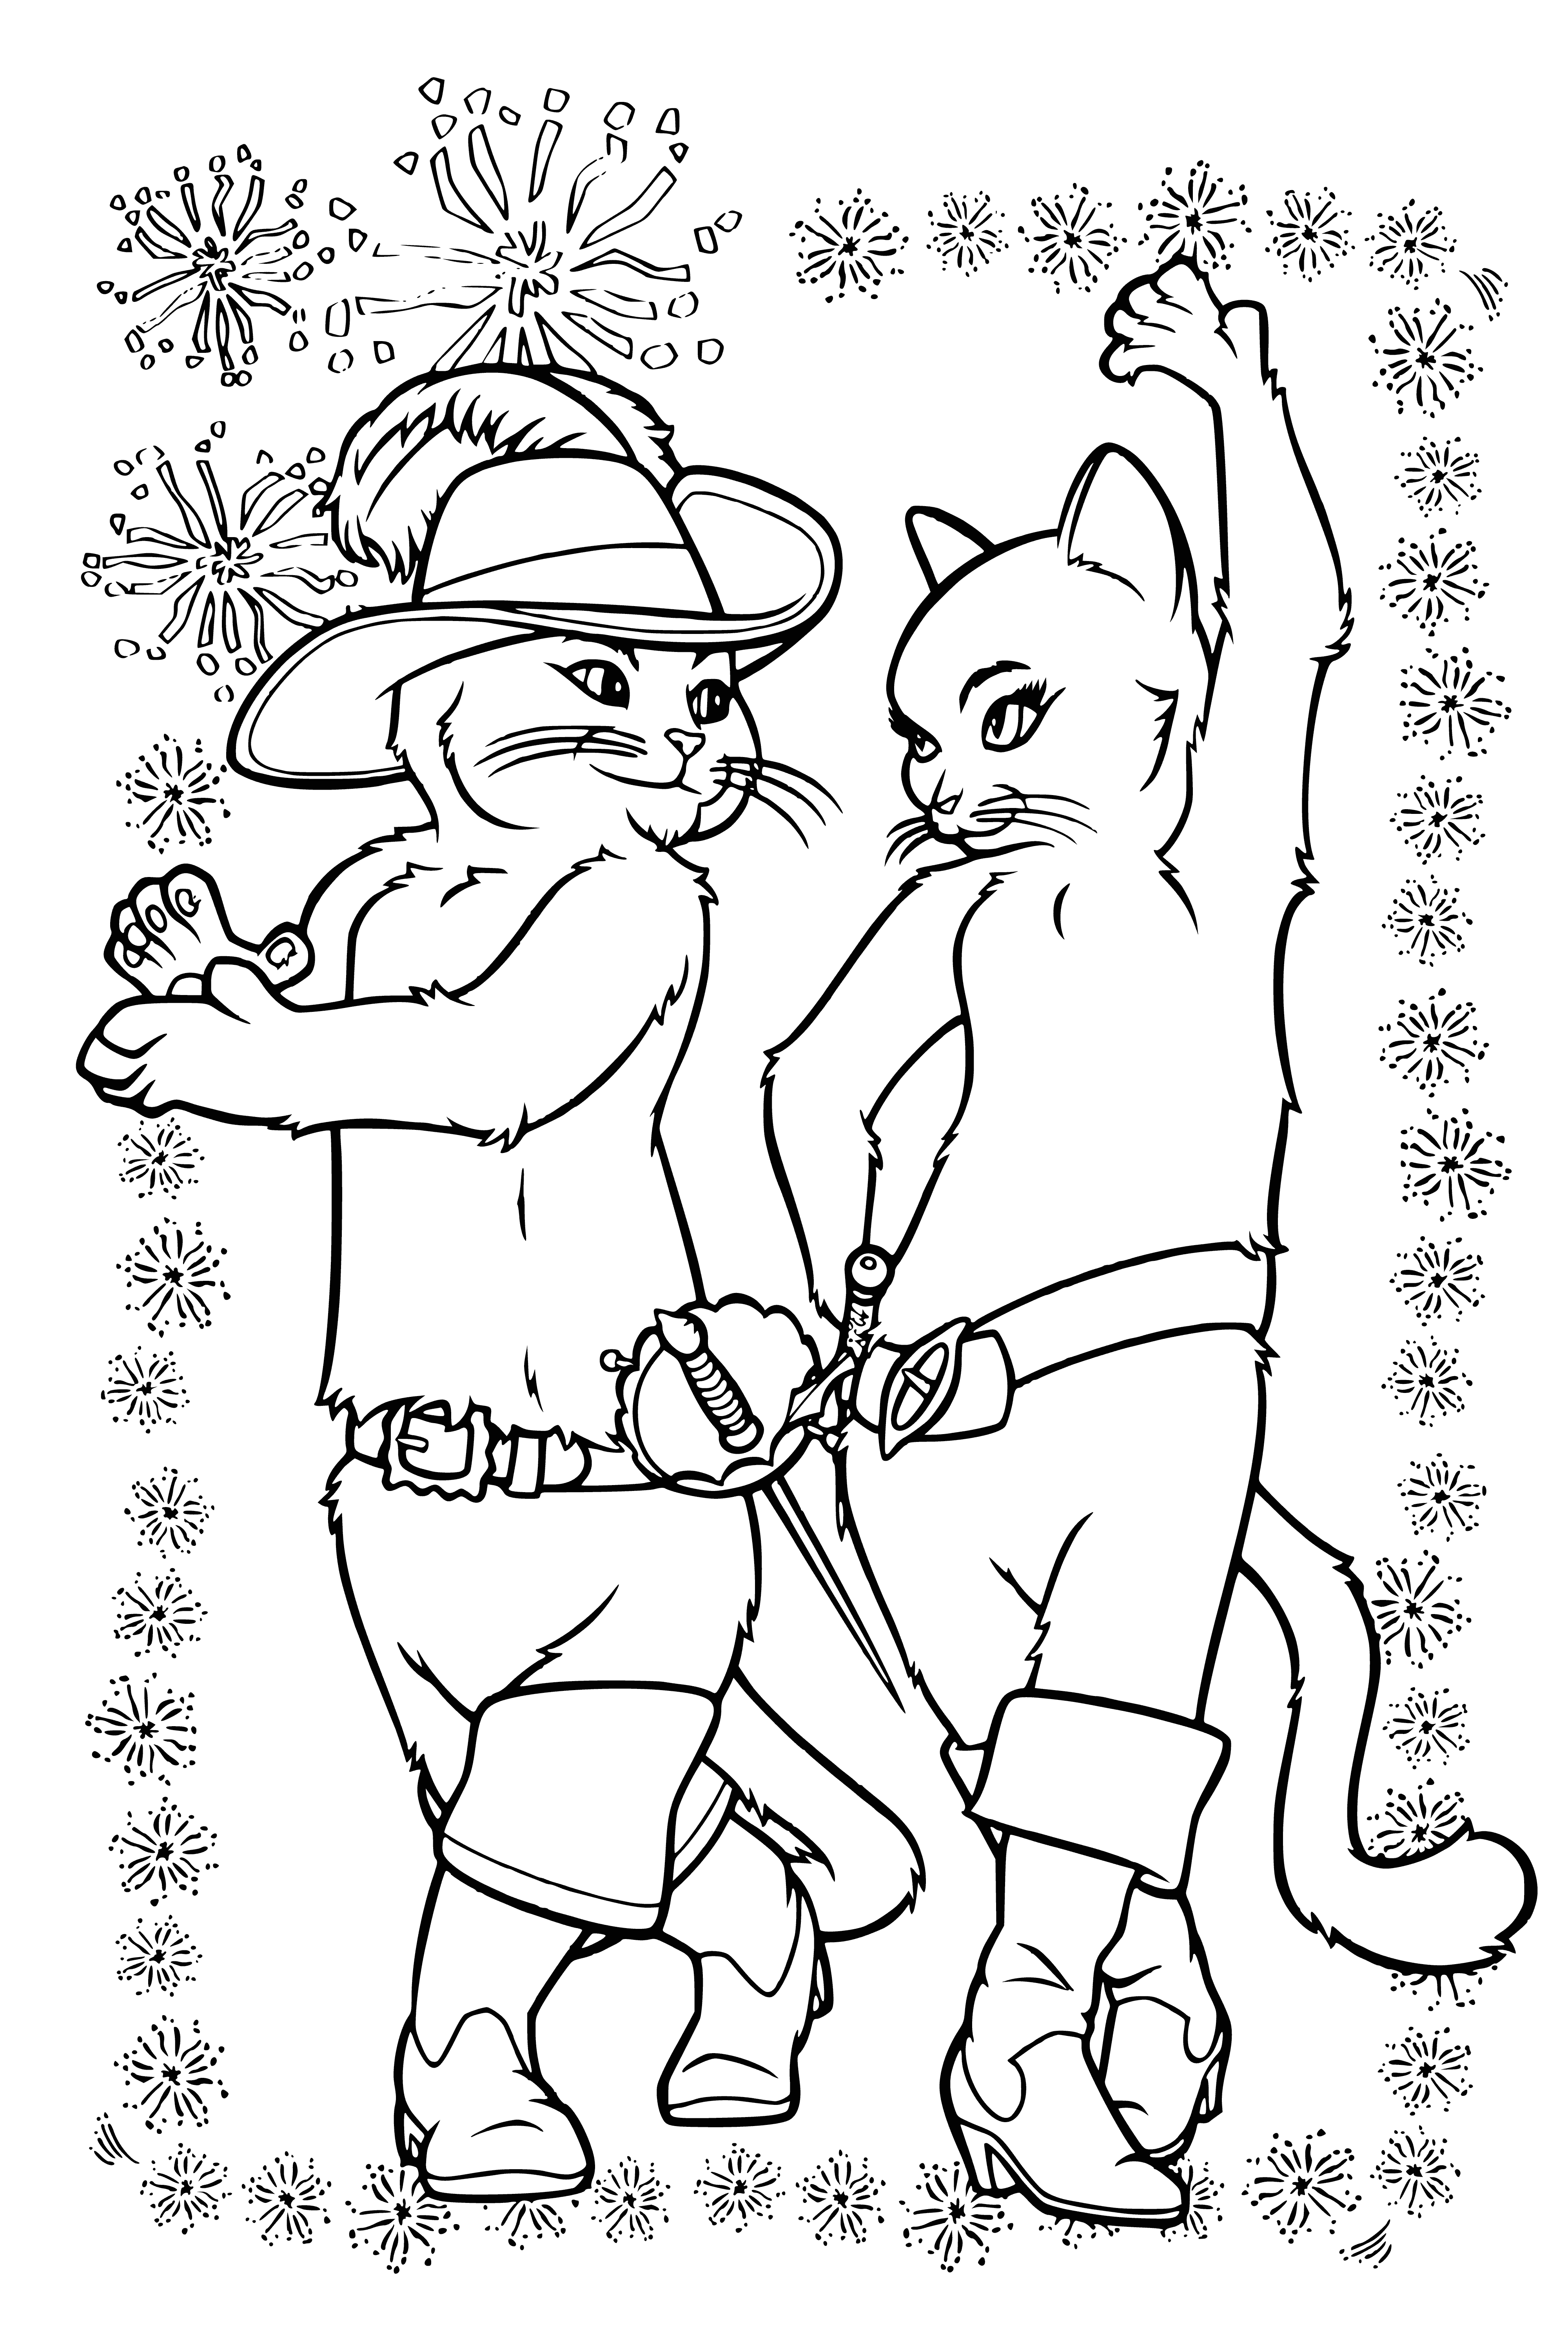 Then I'll dance you! coloring page